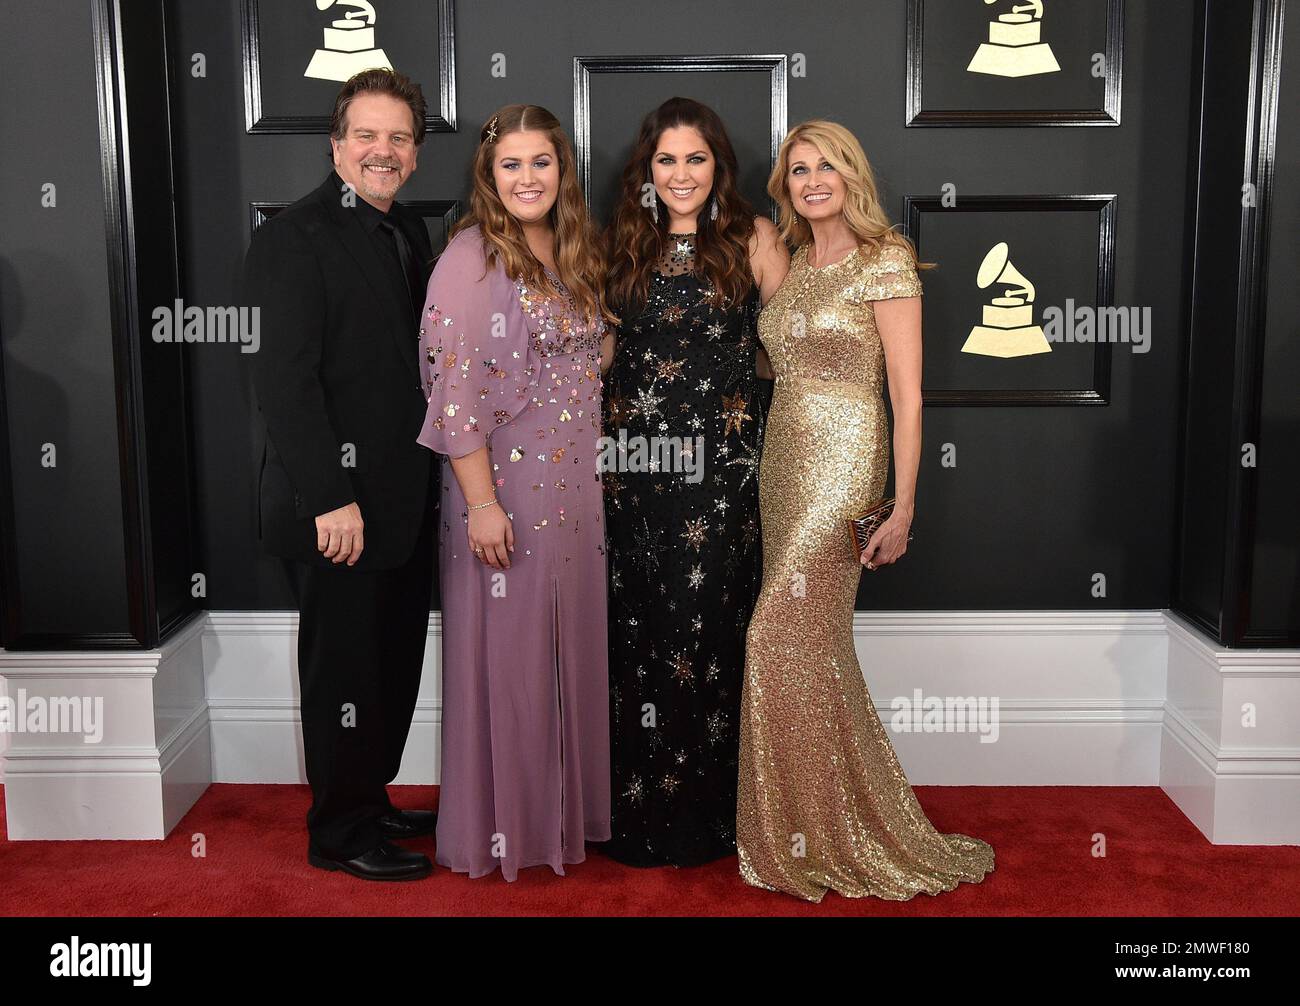 Lang Scott, from left, Rylee Scott, Hillary Scott, and Linda Davis arrive  at the 59th annual Grammy Awards at the Staples Center on Sunday, Feb. 12,  2017, in Los Angeles. (Photo by